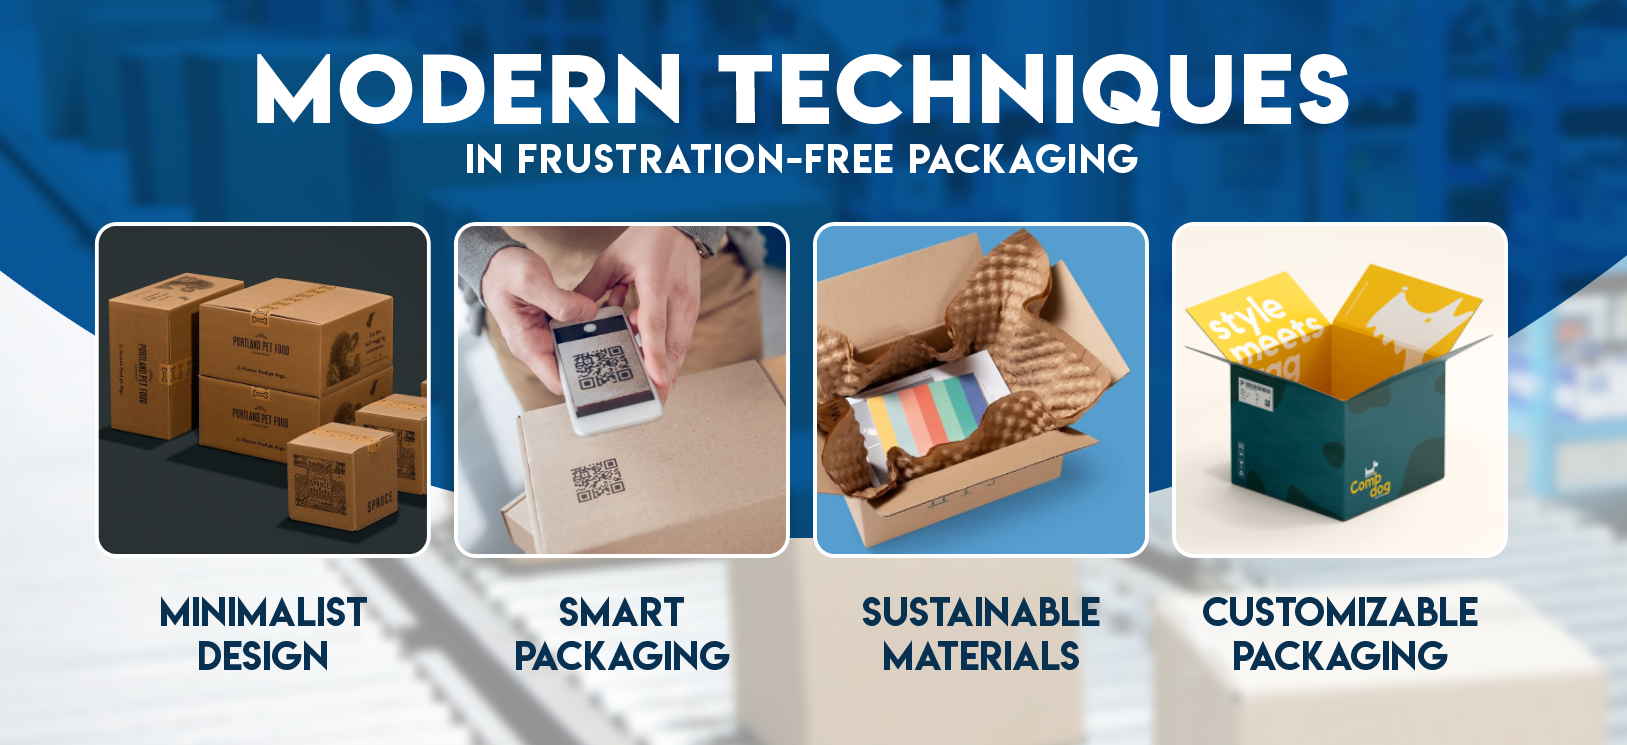 Modern Techniques in Frustration-Free Packaging